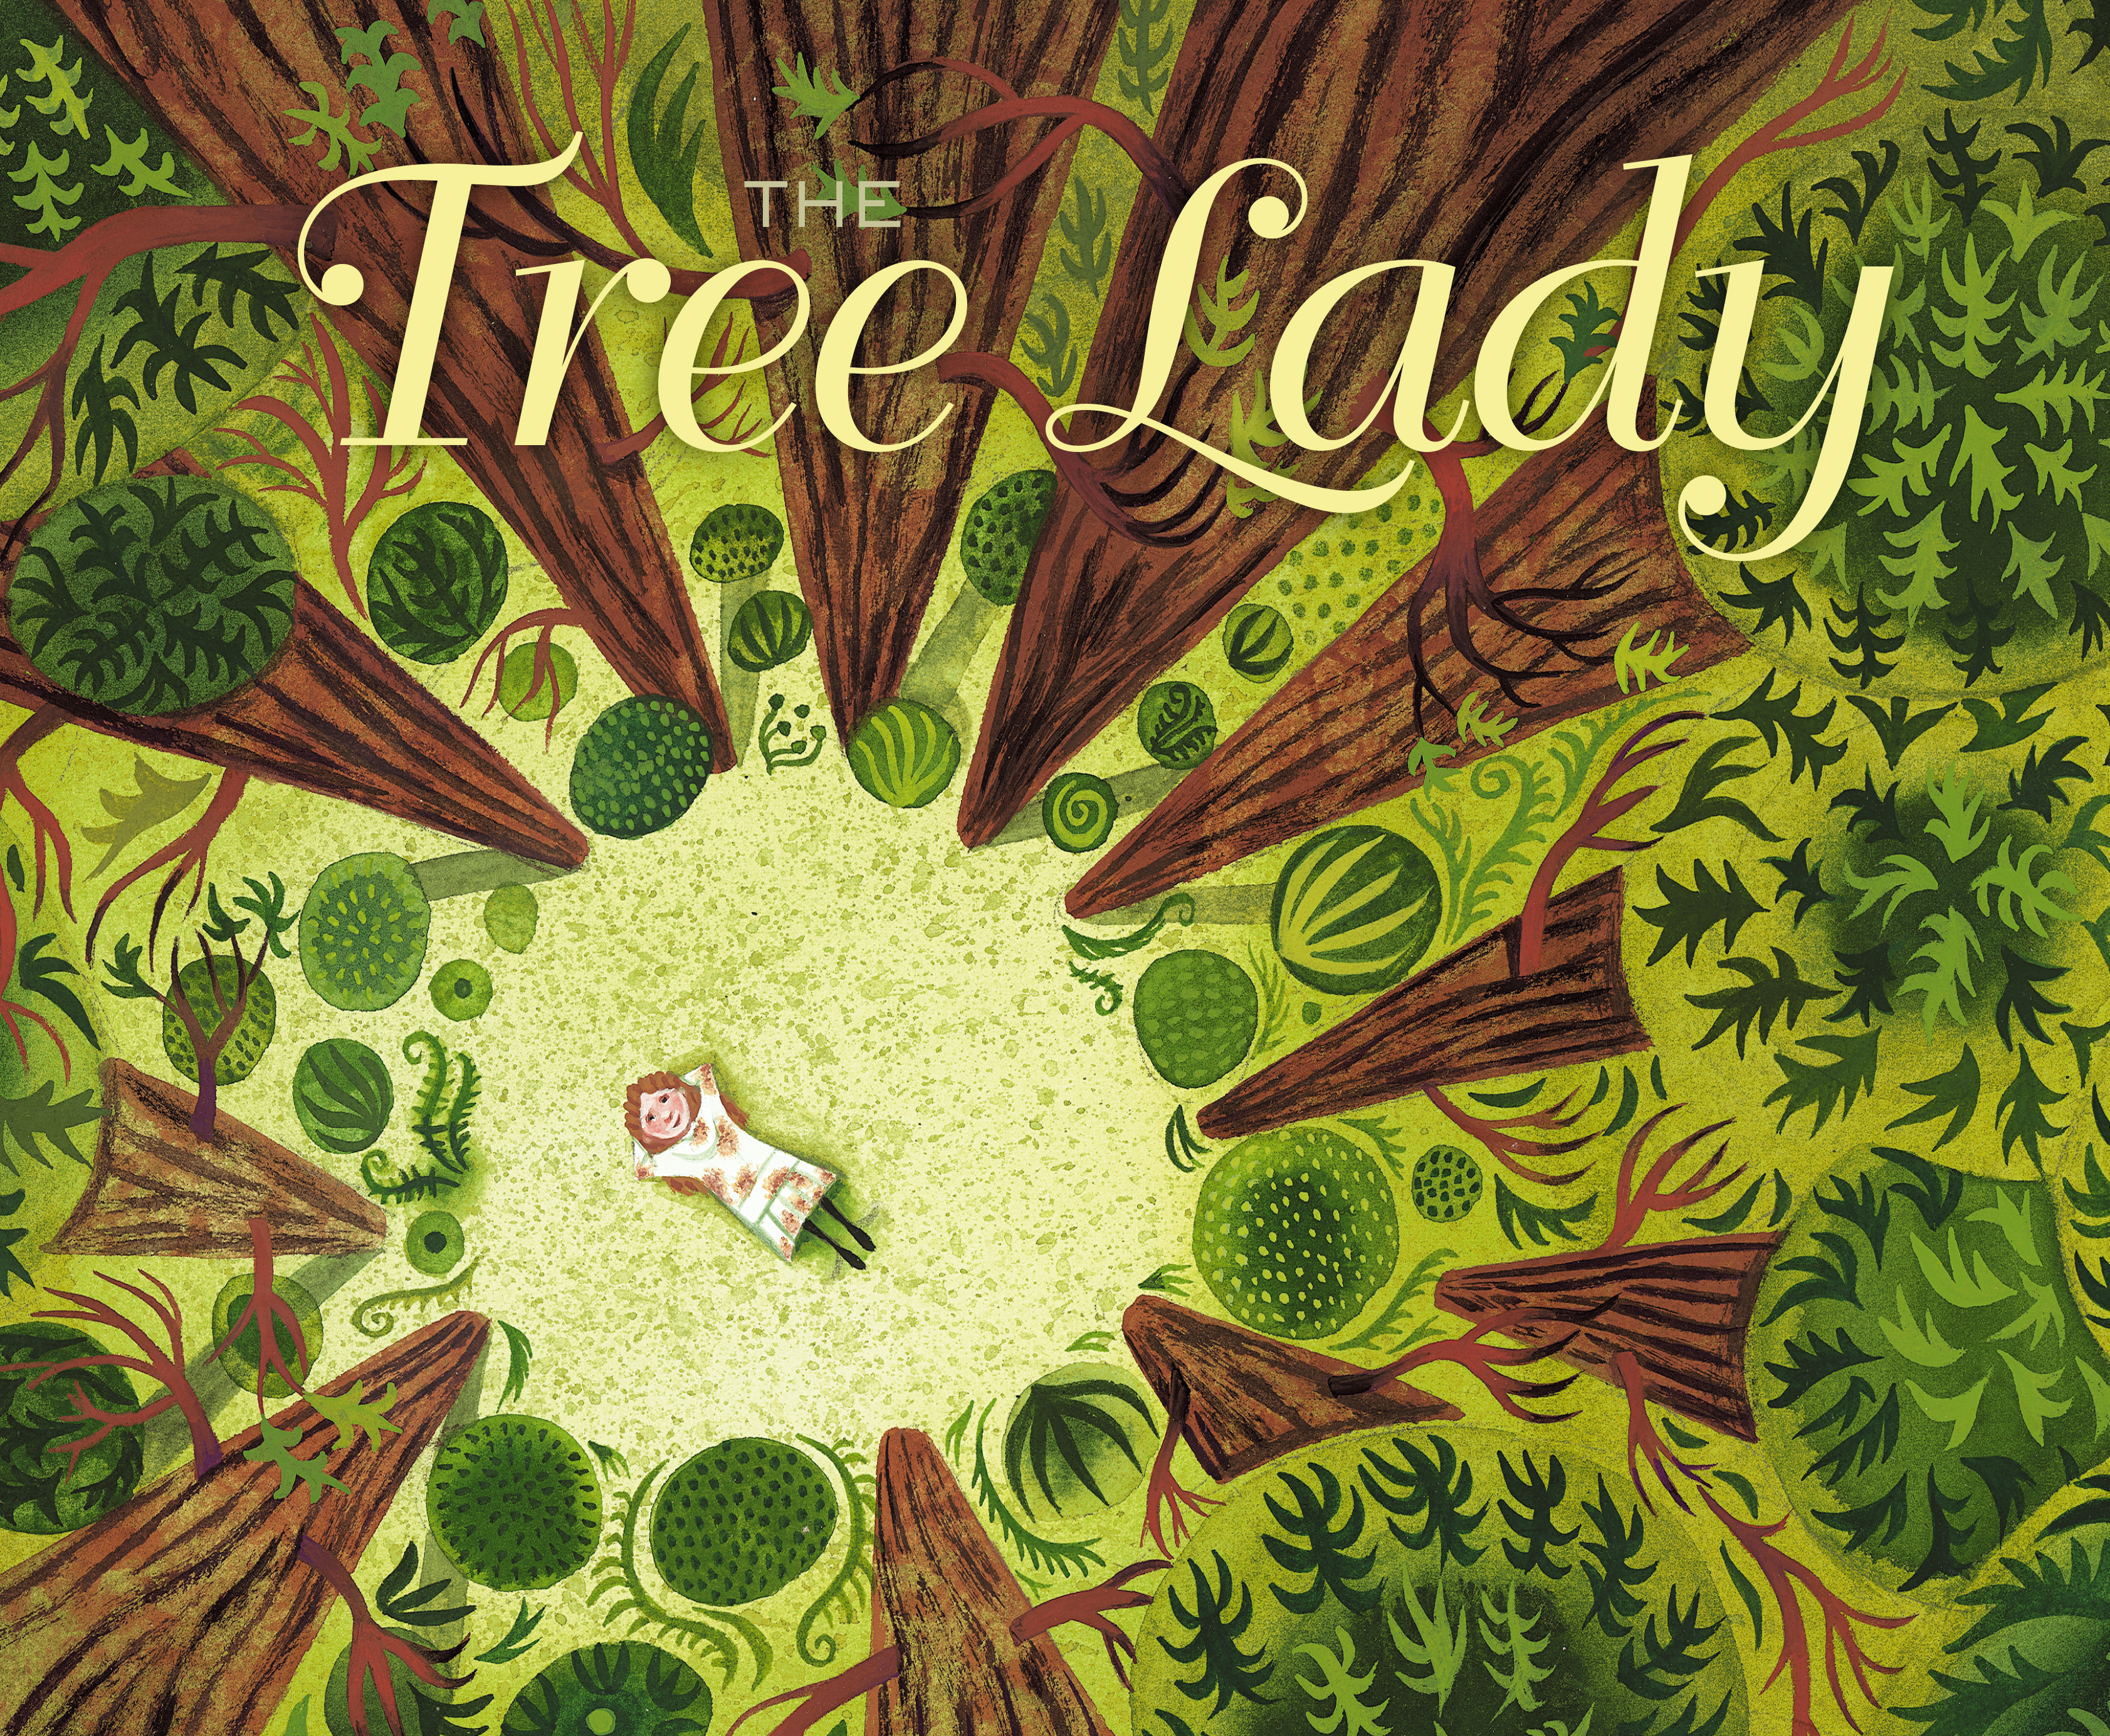 The Tree Lady | Book by H. Joseph Hopkins, Jill McElmurry | Official ...